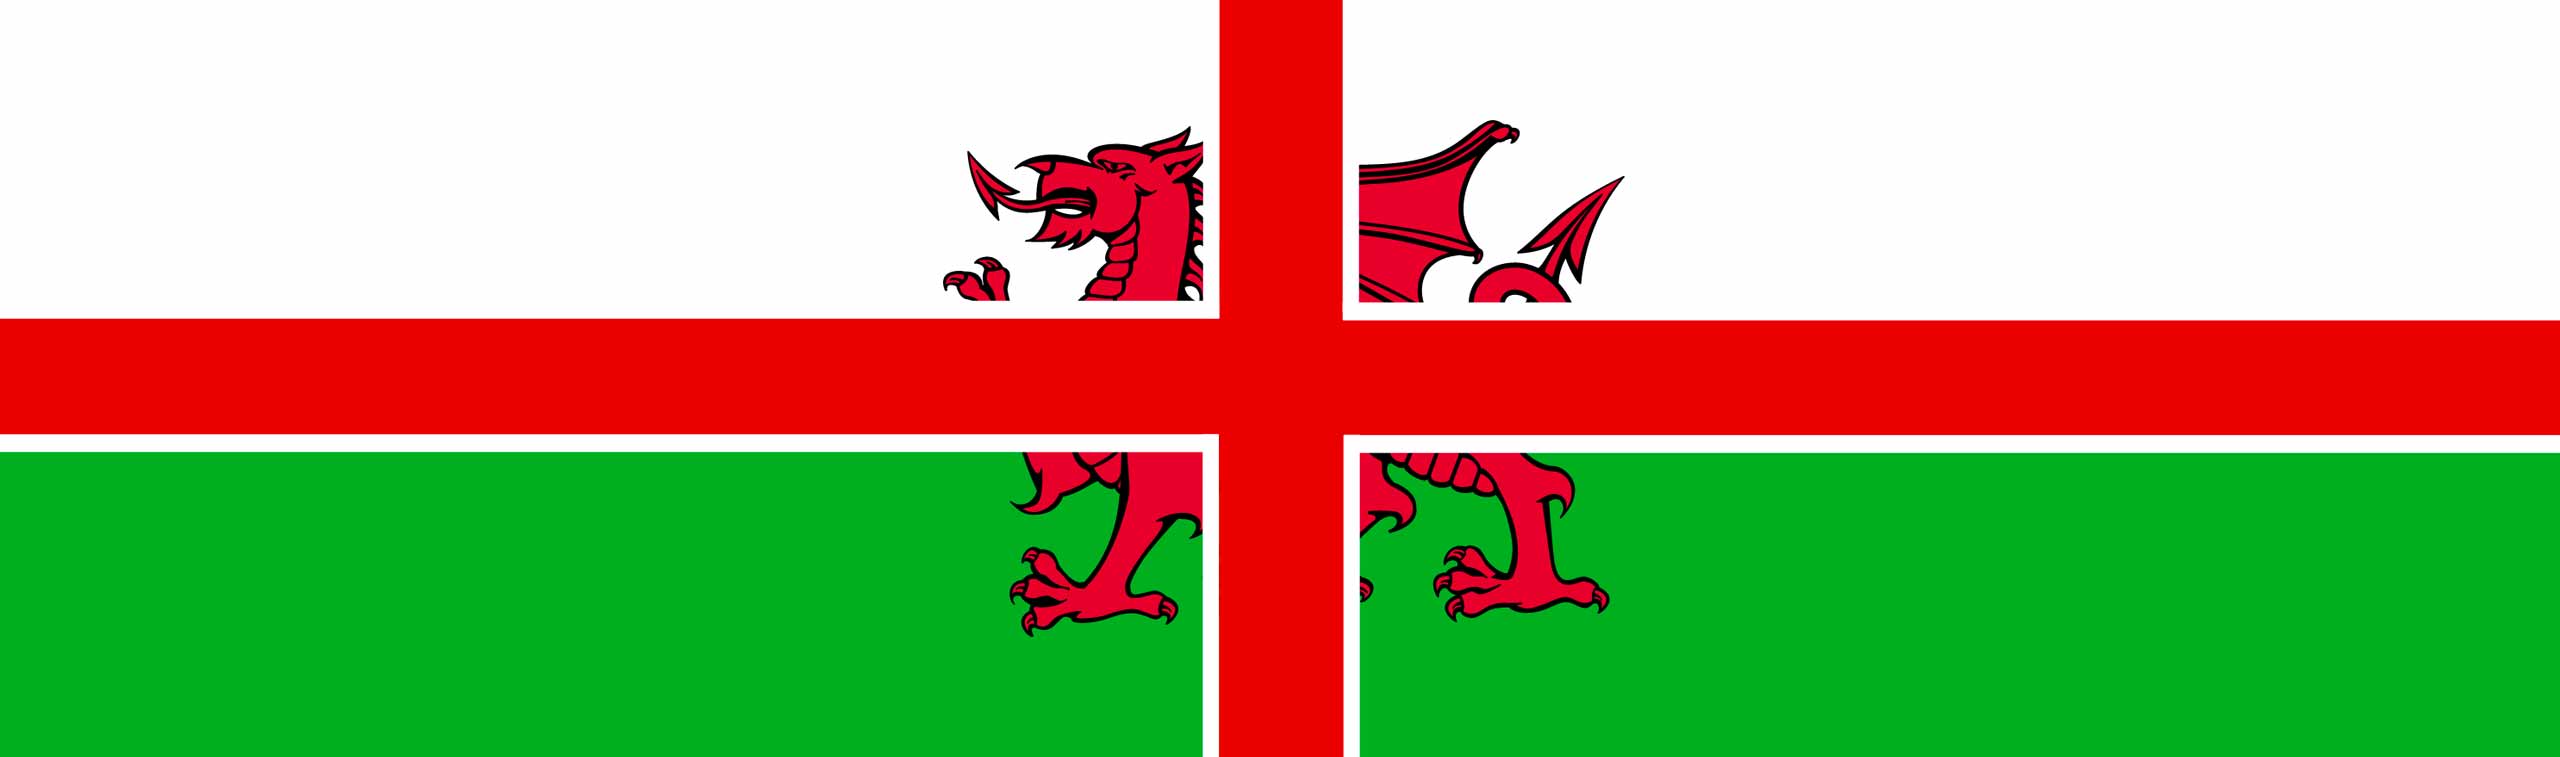 A hybrid of the English and Welsh flags